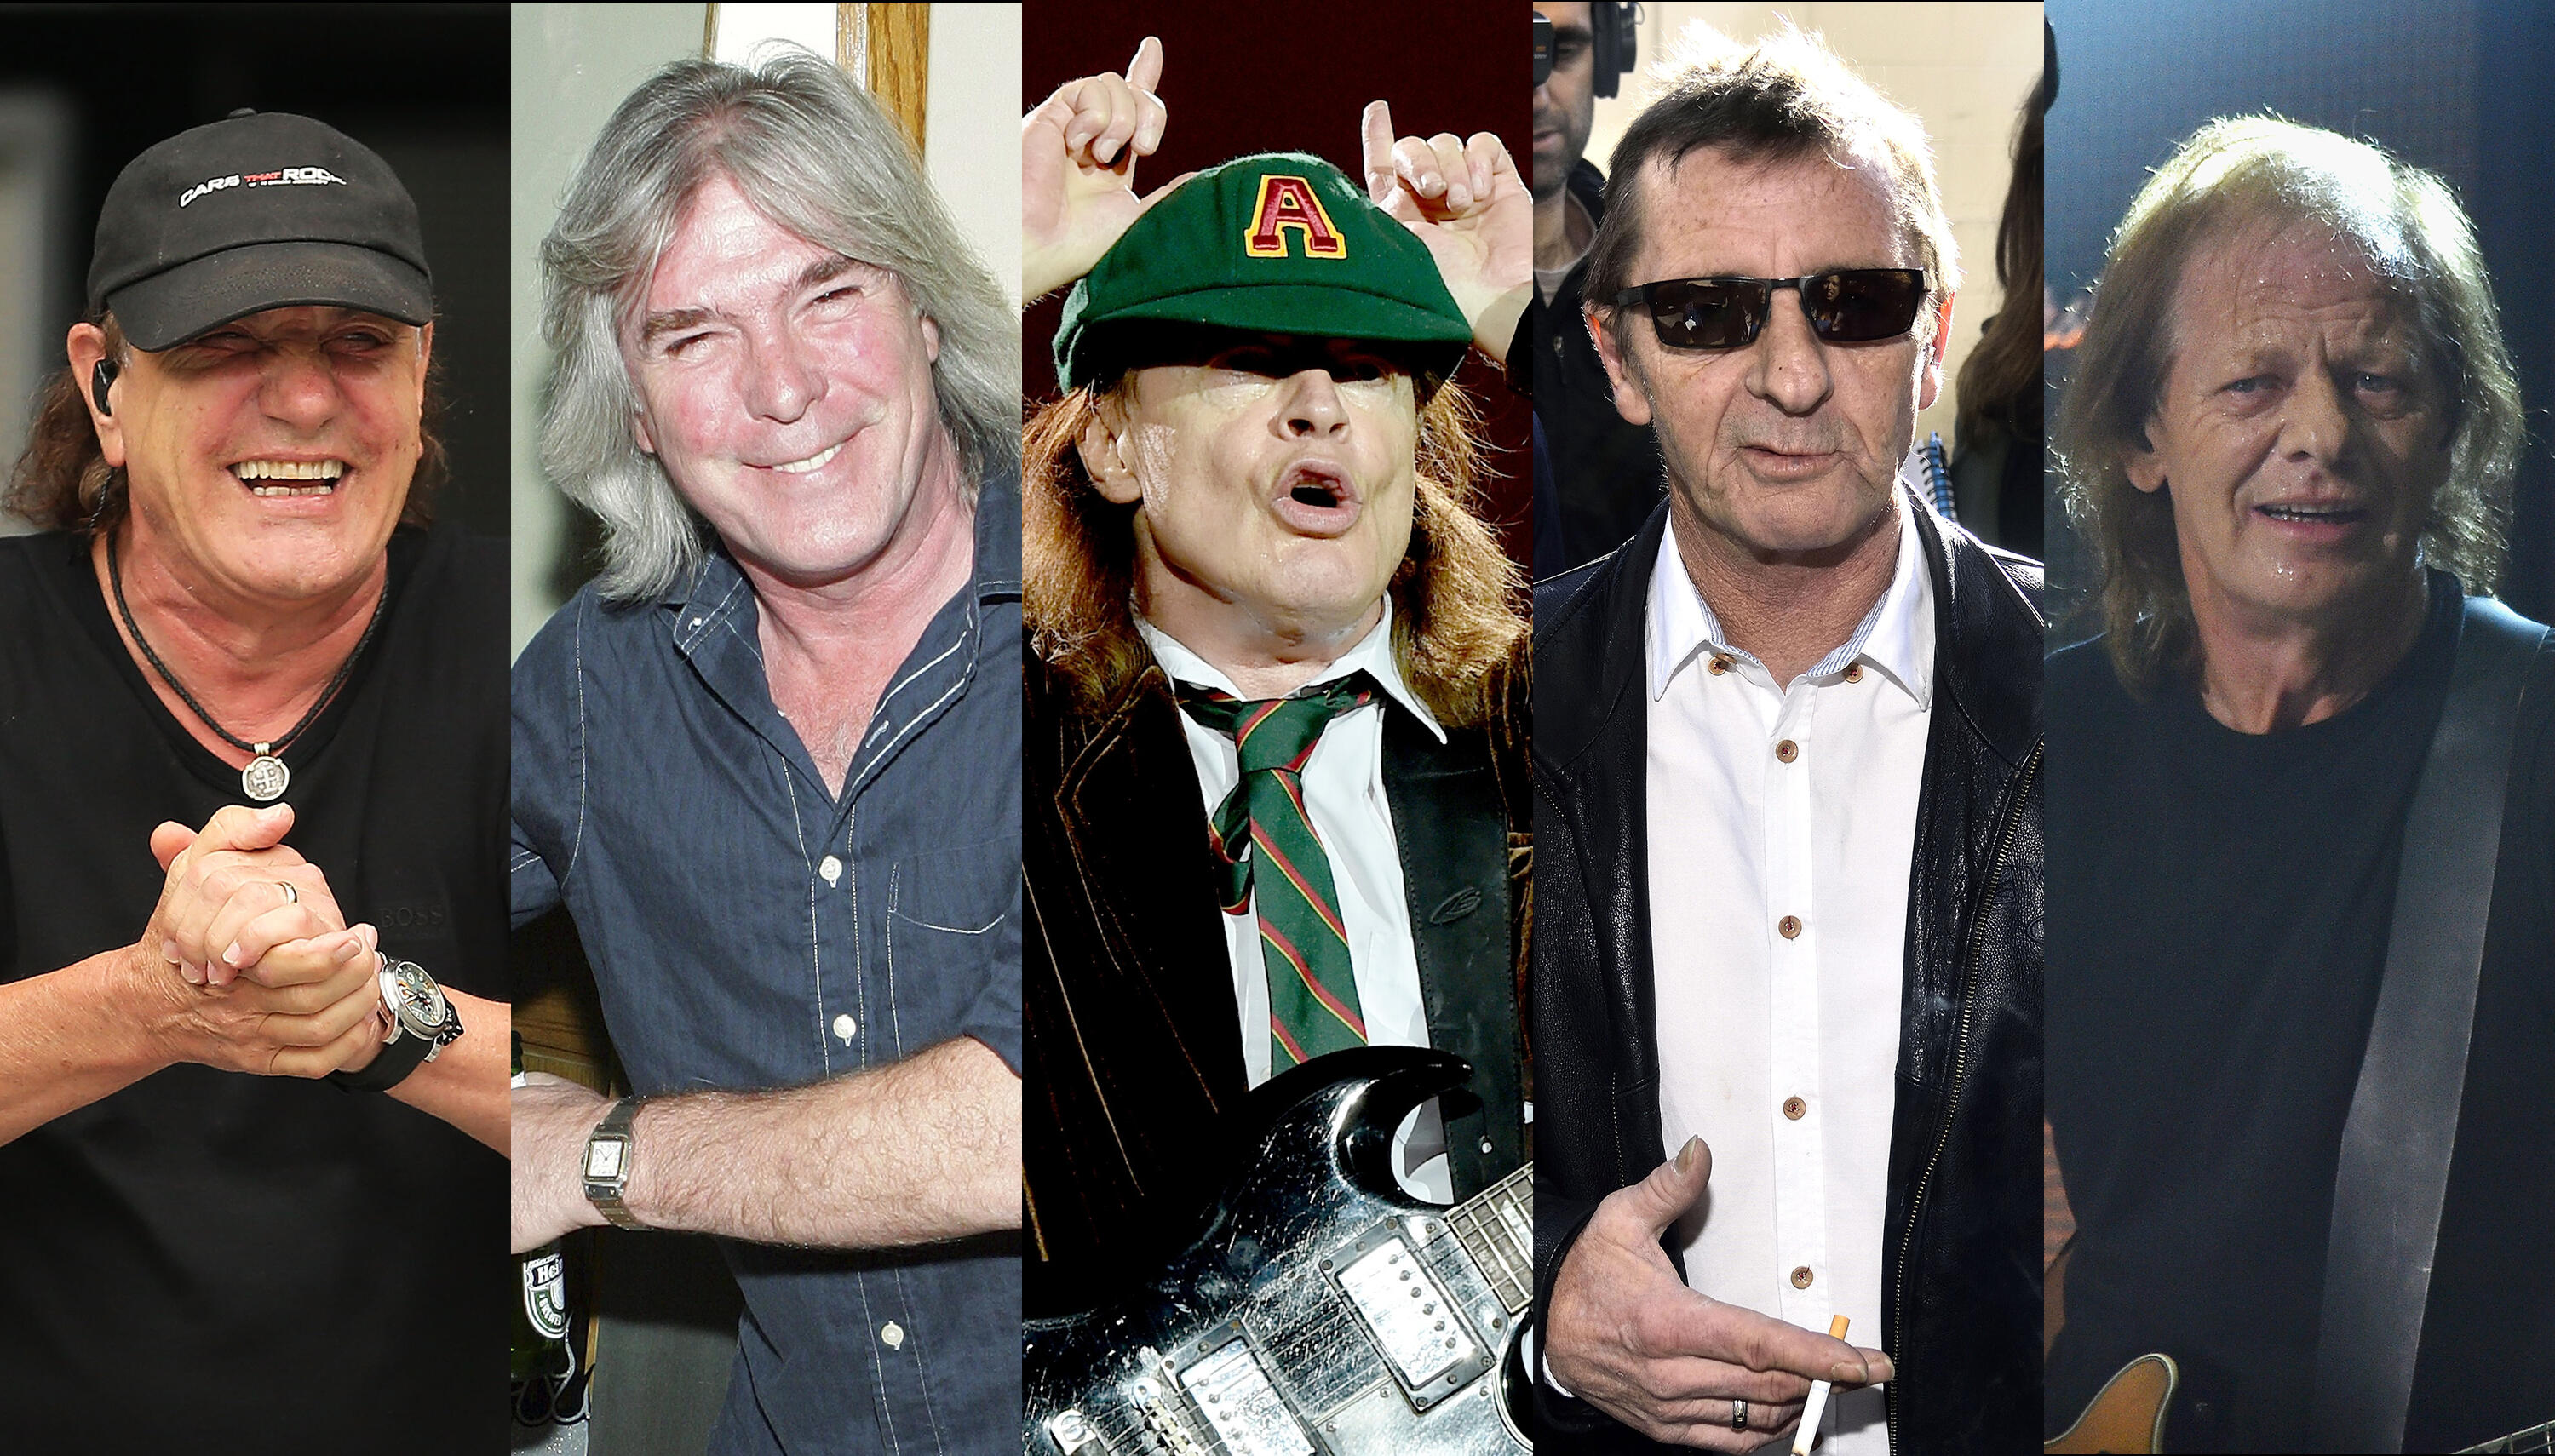 AC/DC Confirms Lineup Photo, Asks If Fans Are 'Ready' | iHeart